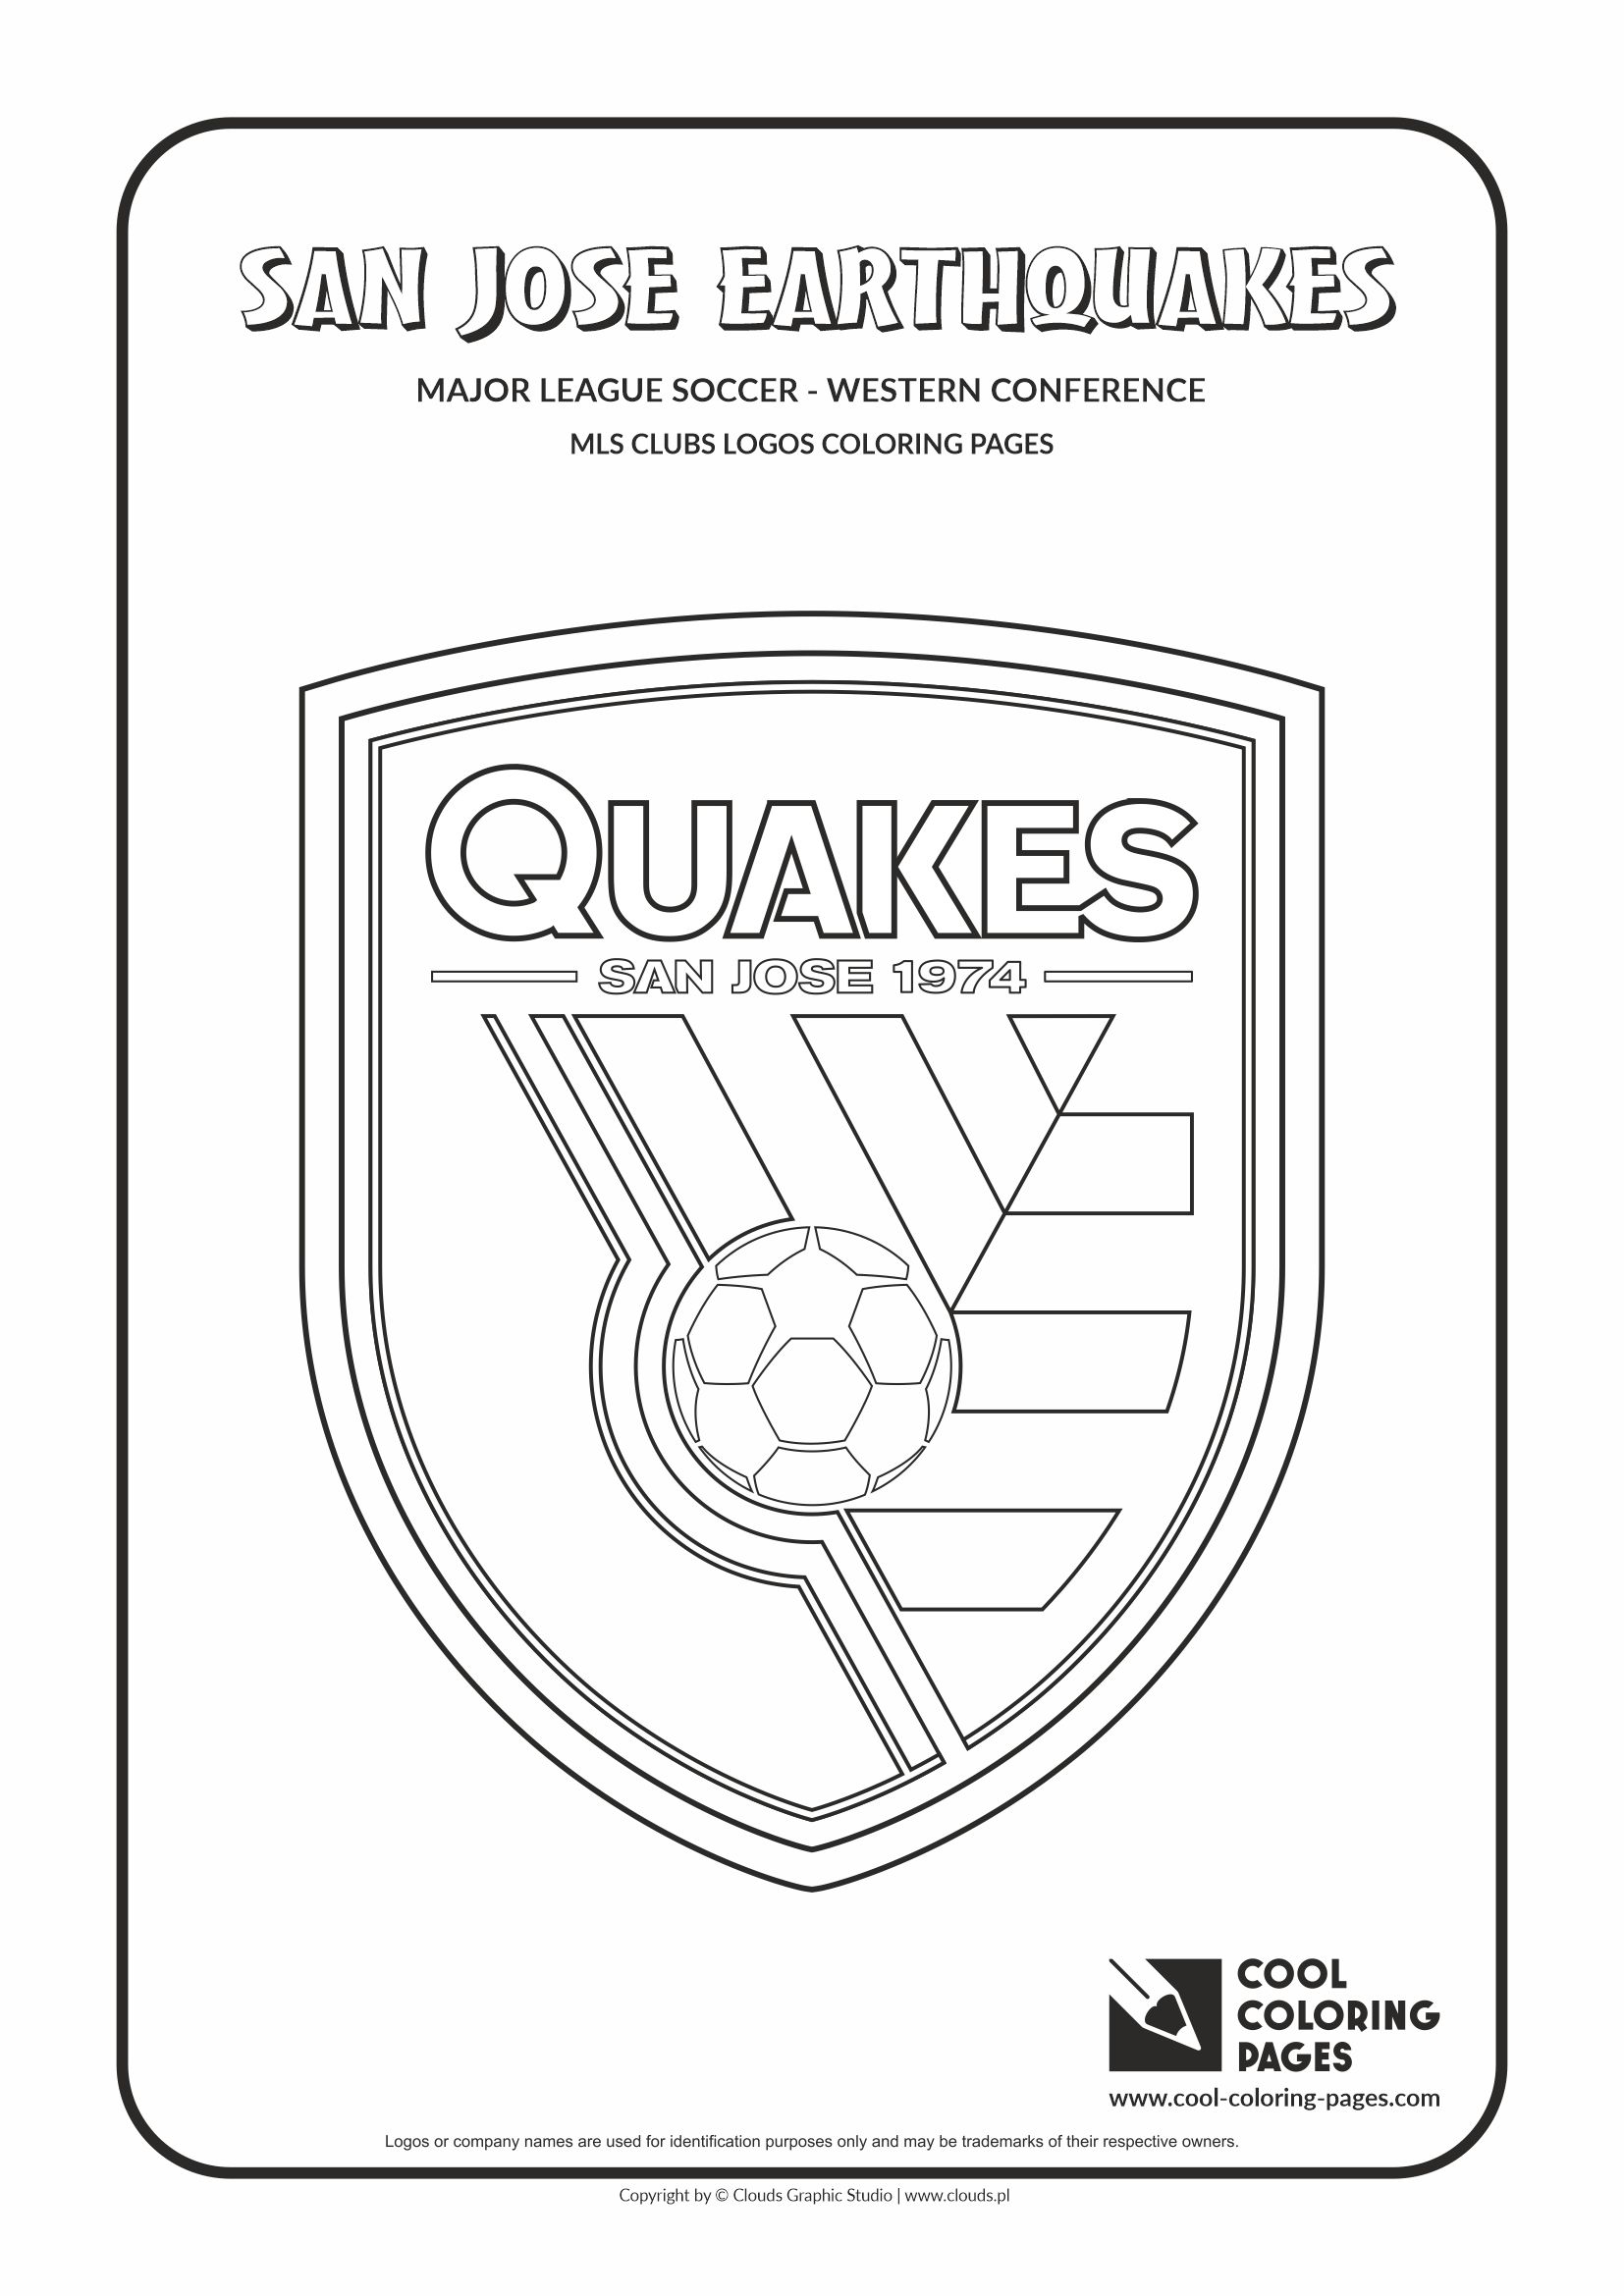 Cool Coloring Pages – MLS Clubs logos - San Jose Earthquakes